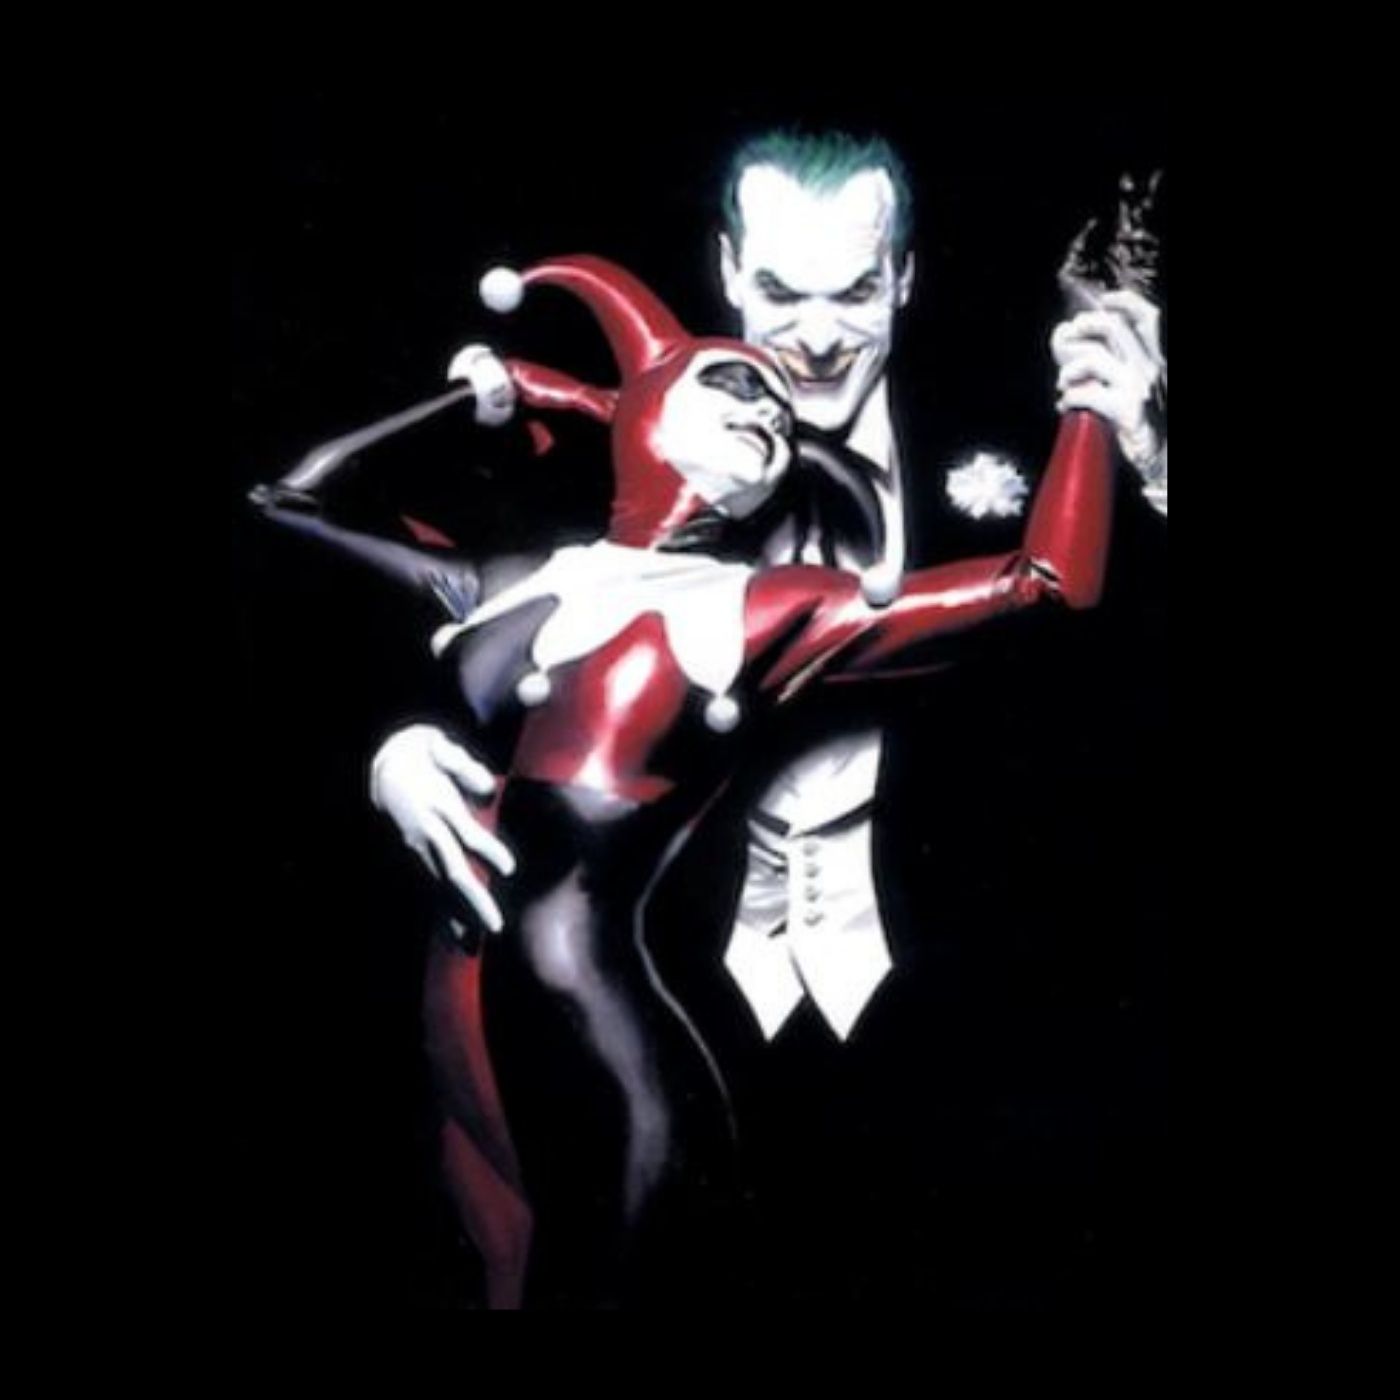 A PSYCHOLOGICAL LOOK AT HARLEY QUINN